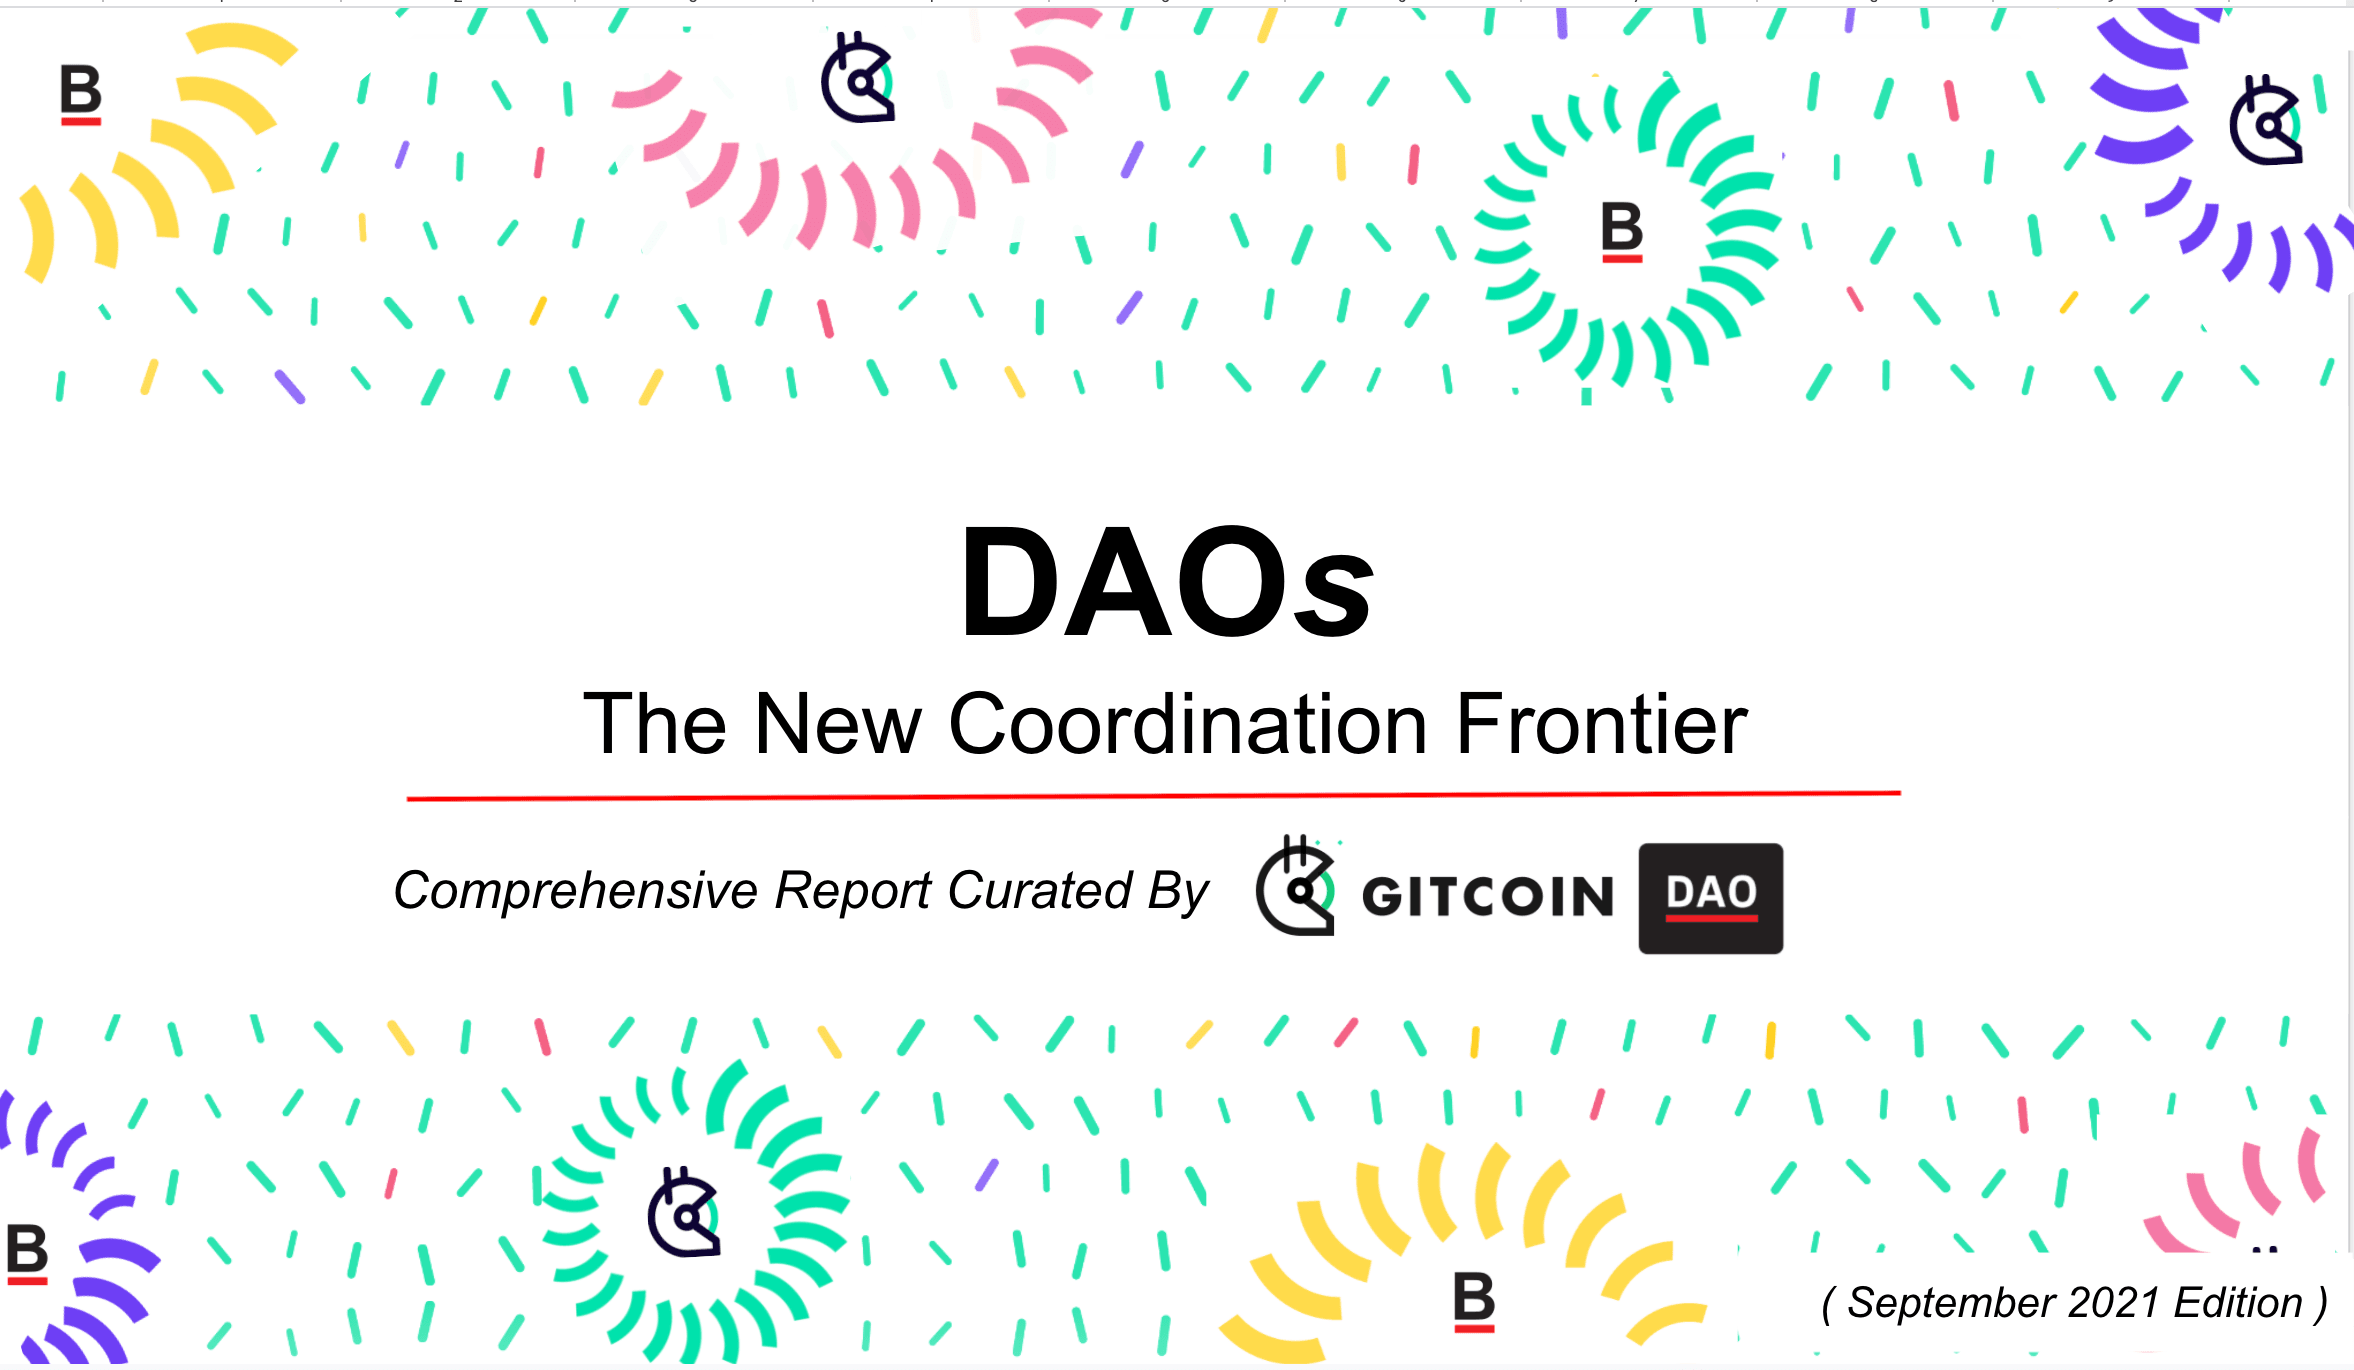 DAOs - The New Coordination Frontier